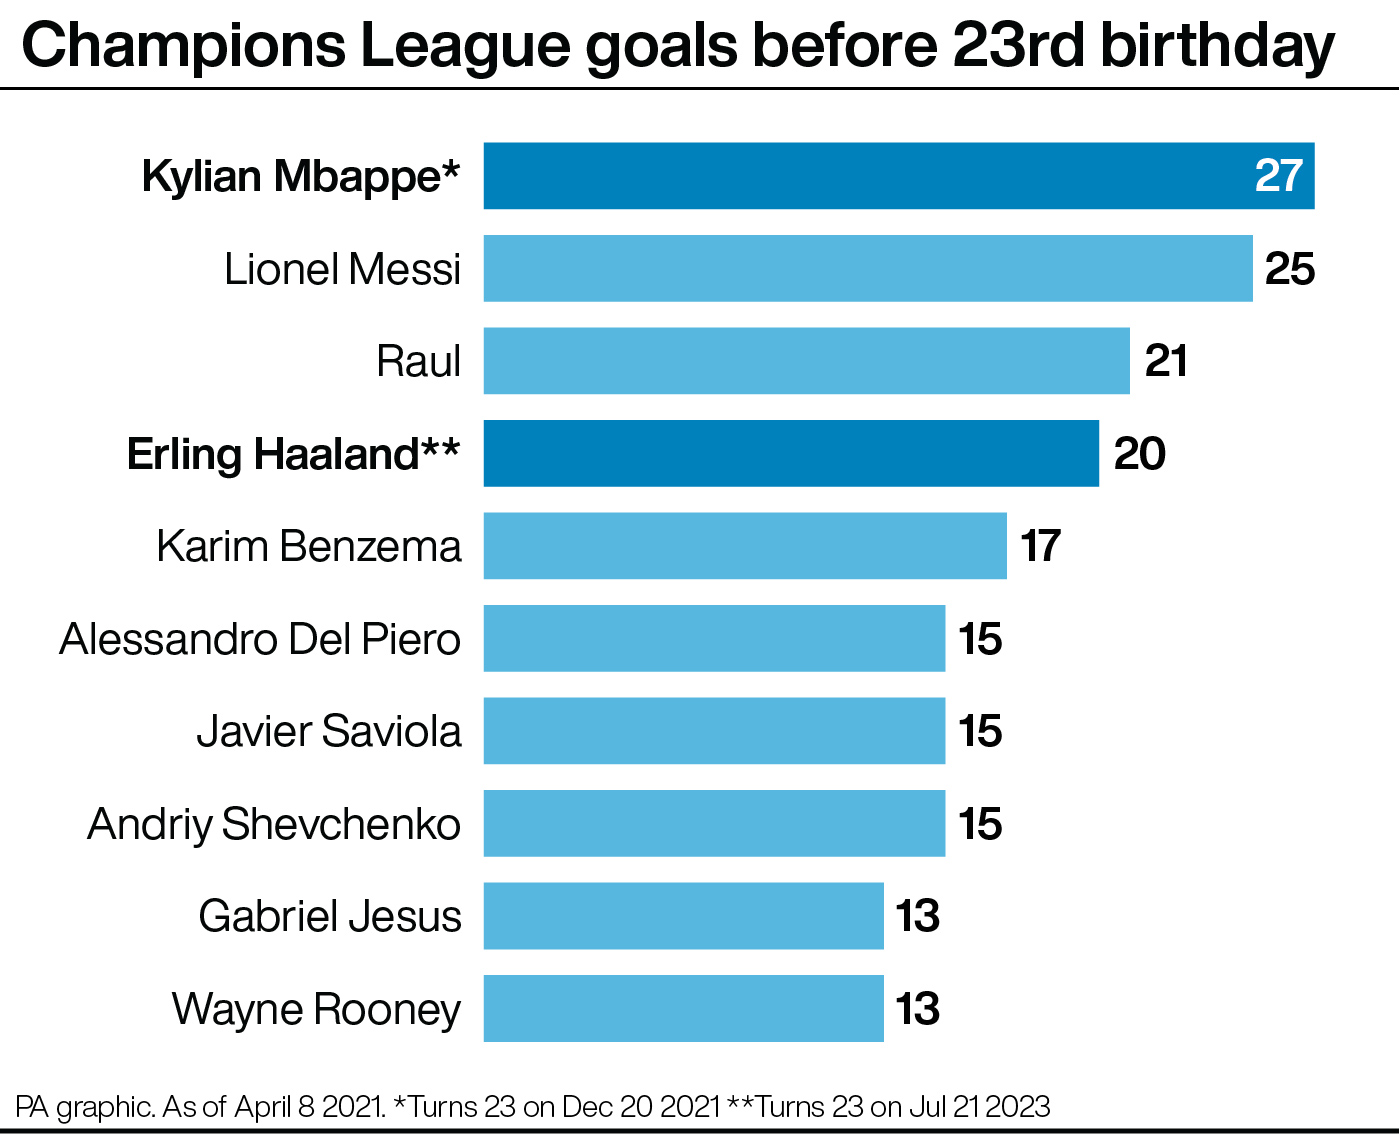 Most Champions League goals before turning 23